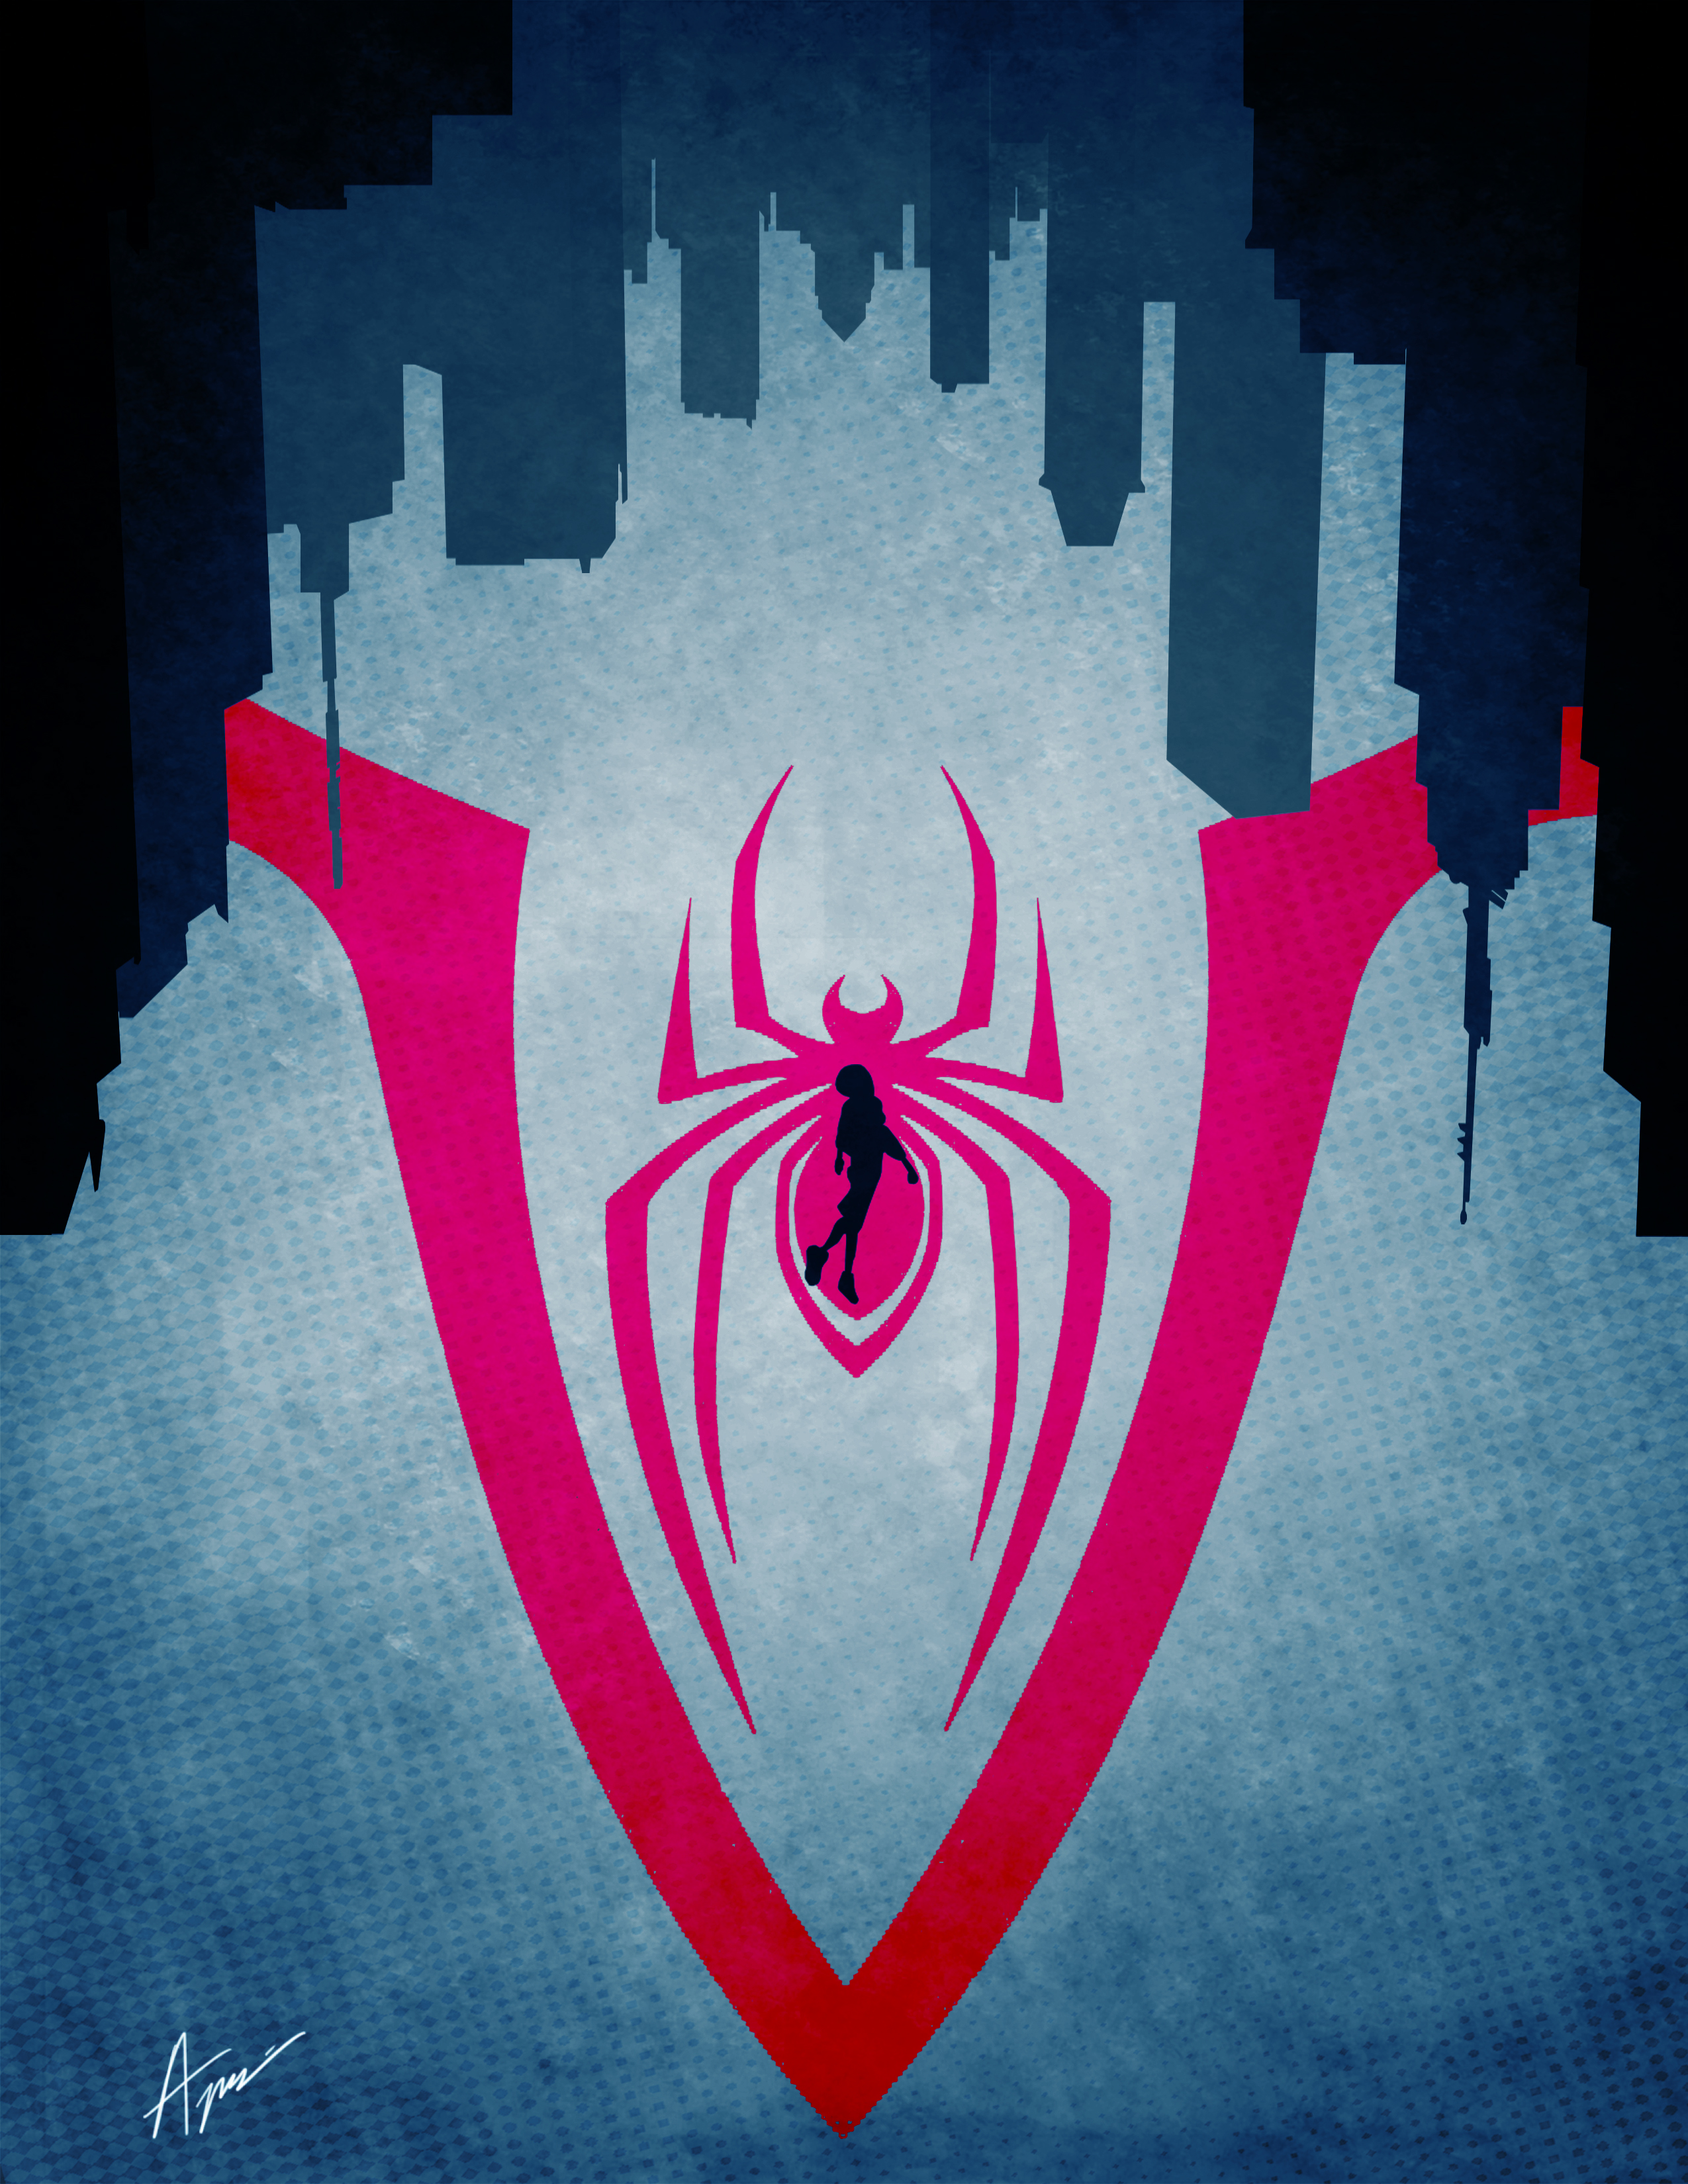 Spiderman Into The Spiderverse Illustrated Poster, HD Superheroes, 4k